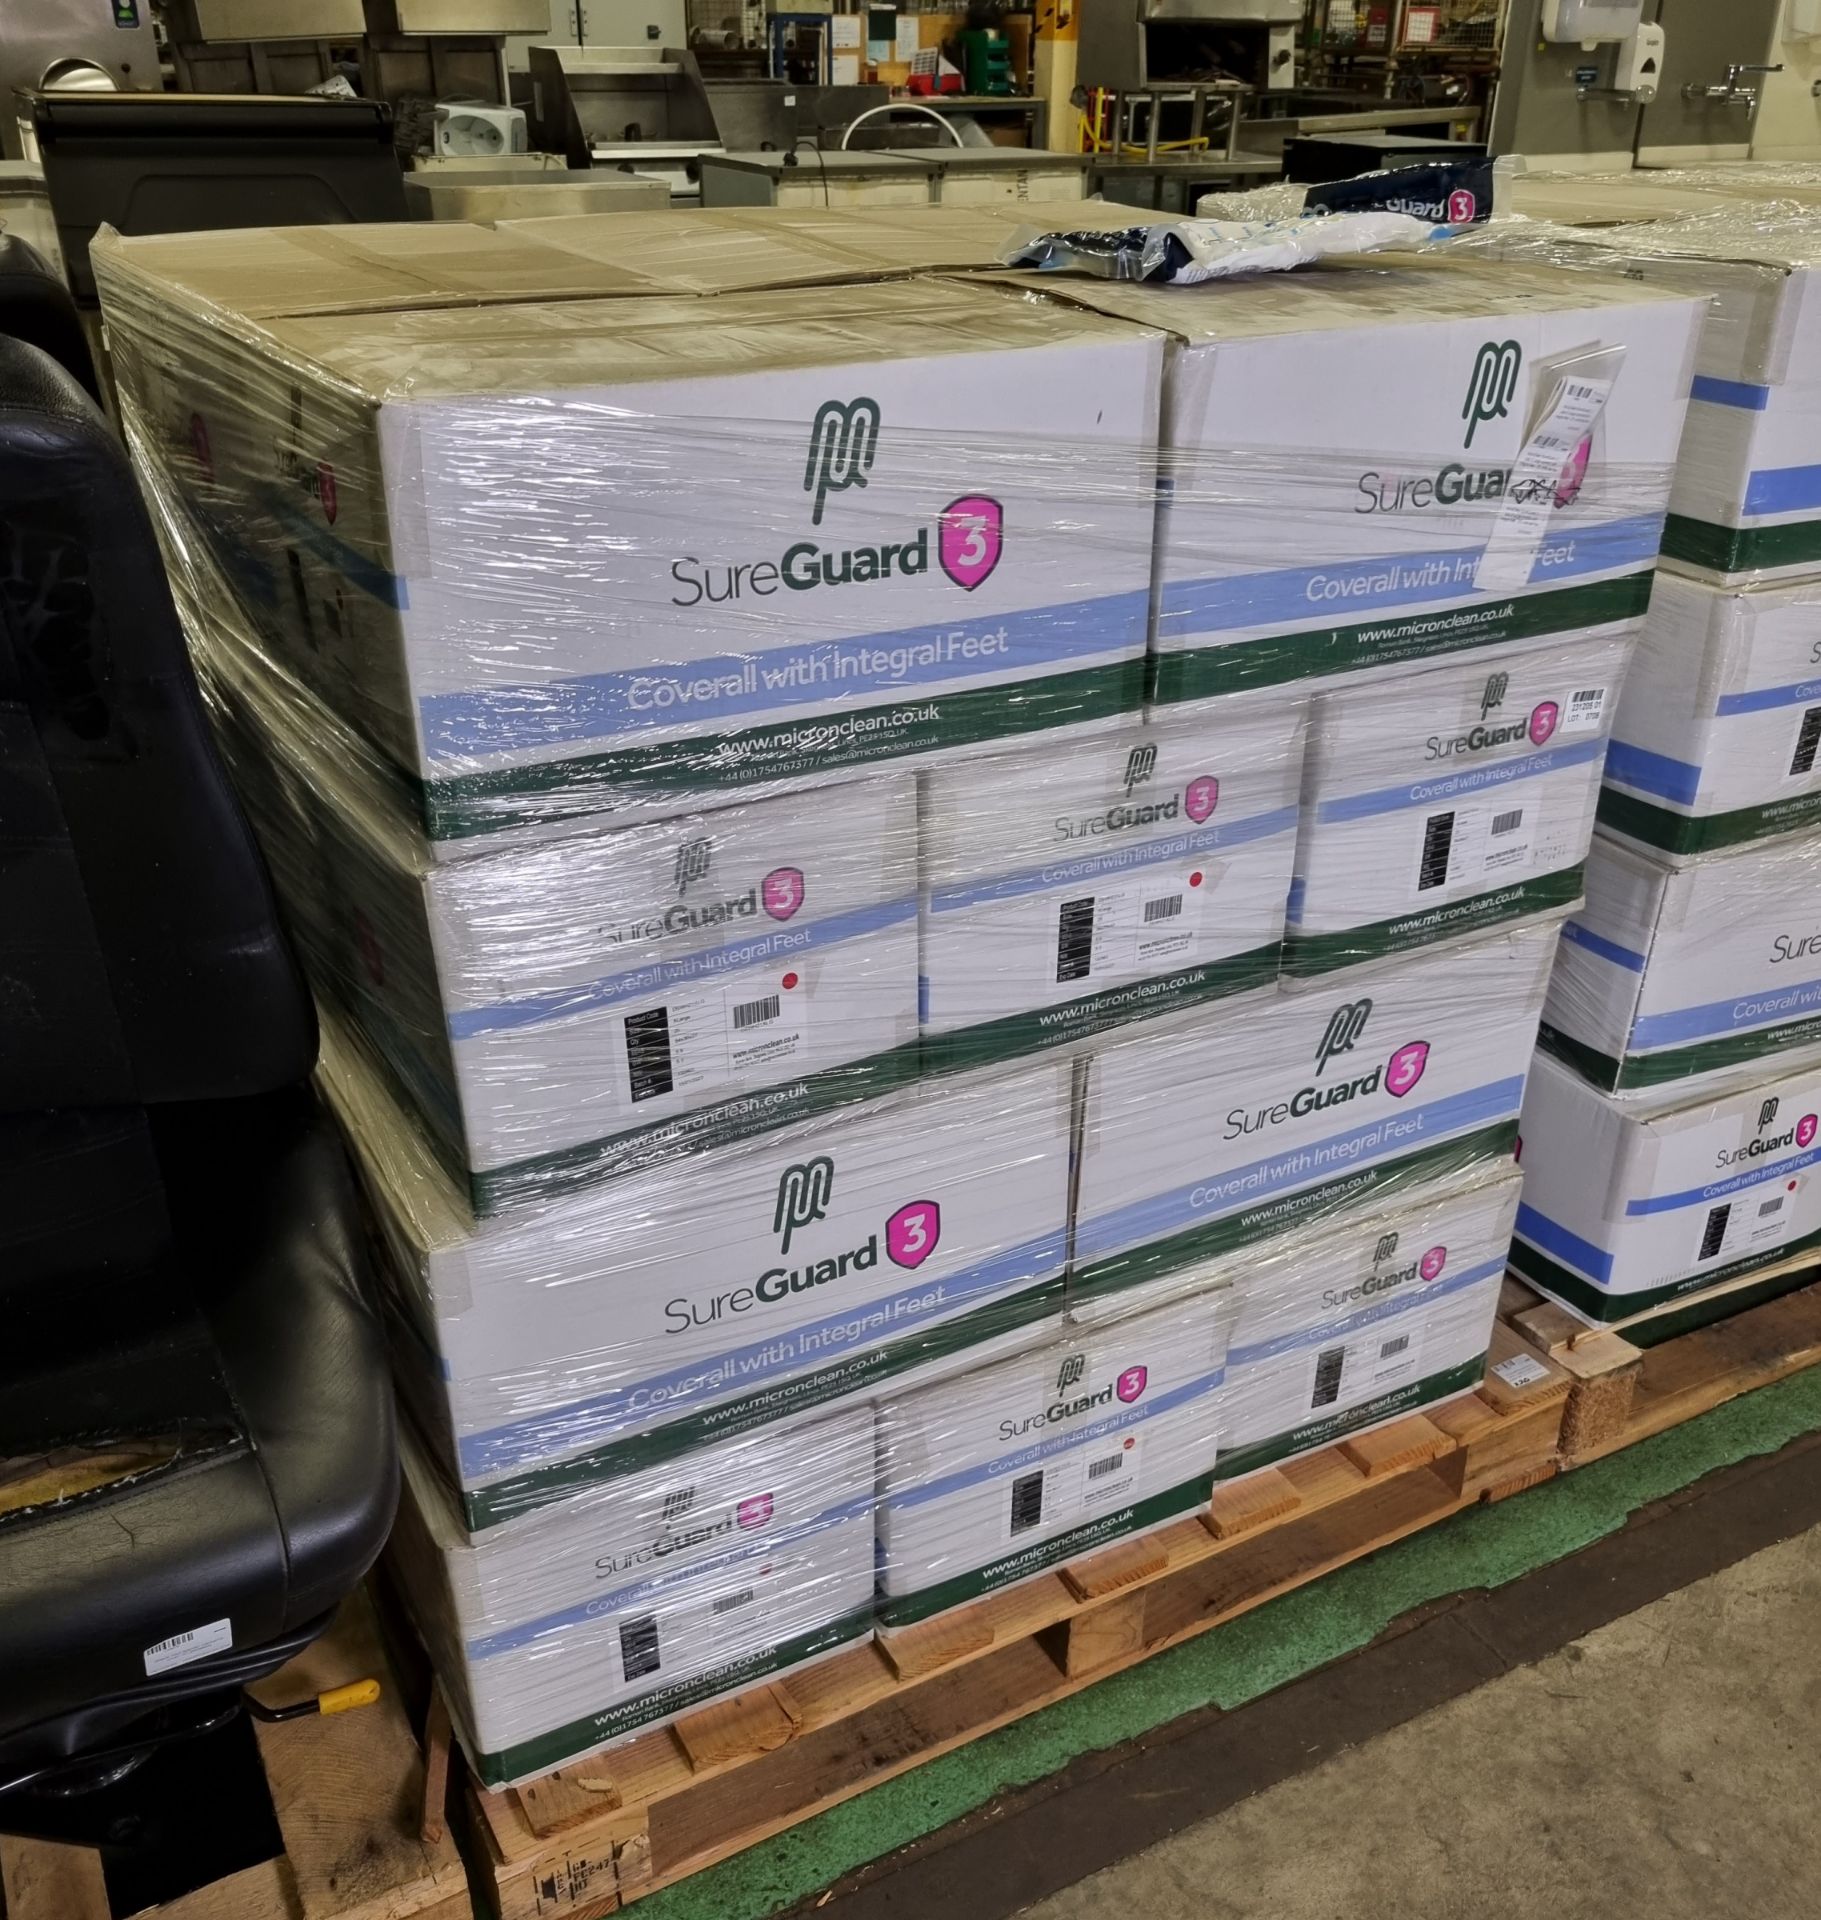 20x boxes of MicroClean SureGuard 3 - size X Large coverall with integral feet - 25 per box - Image 2 of 5